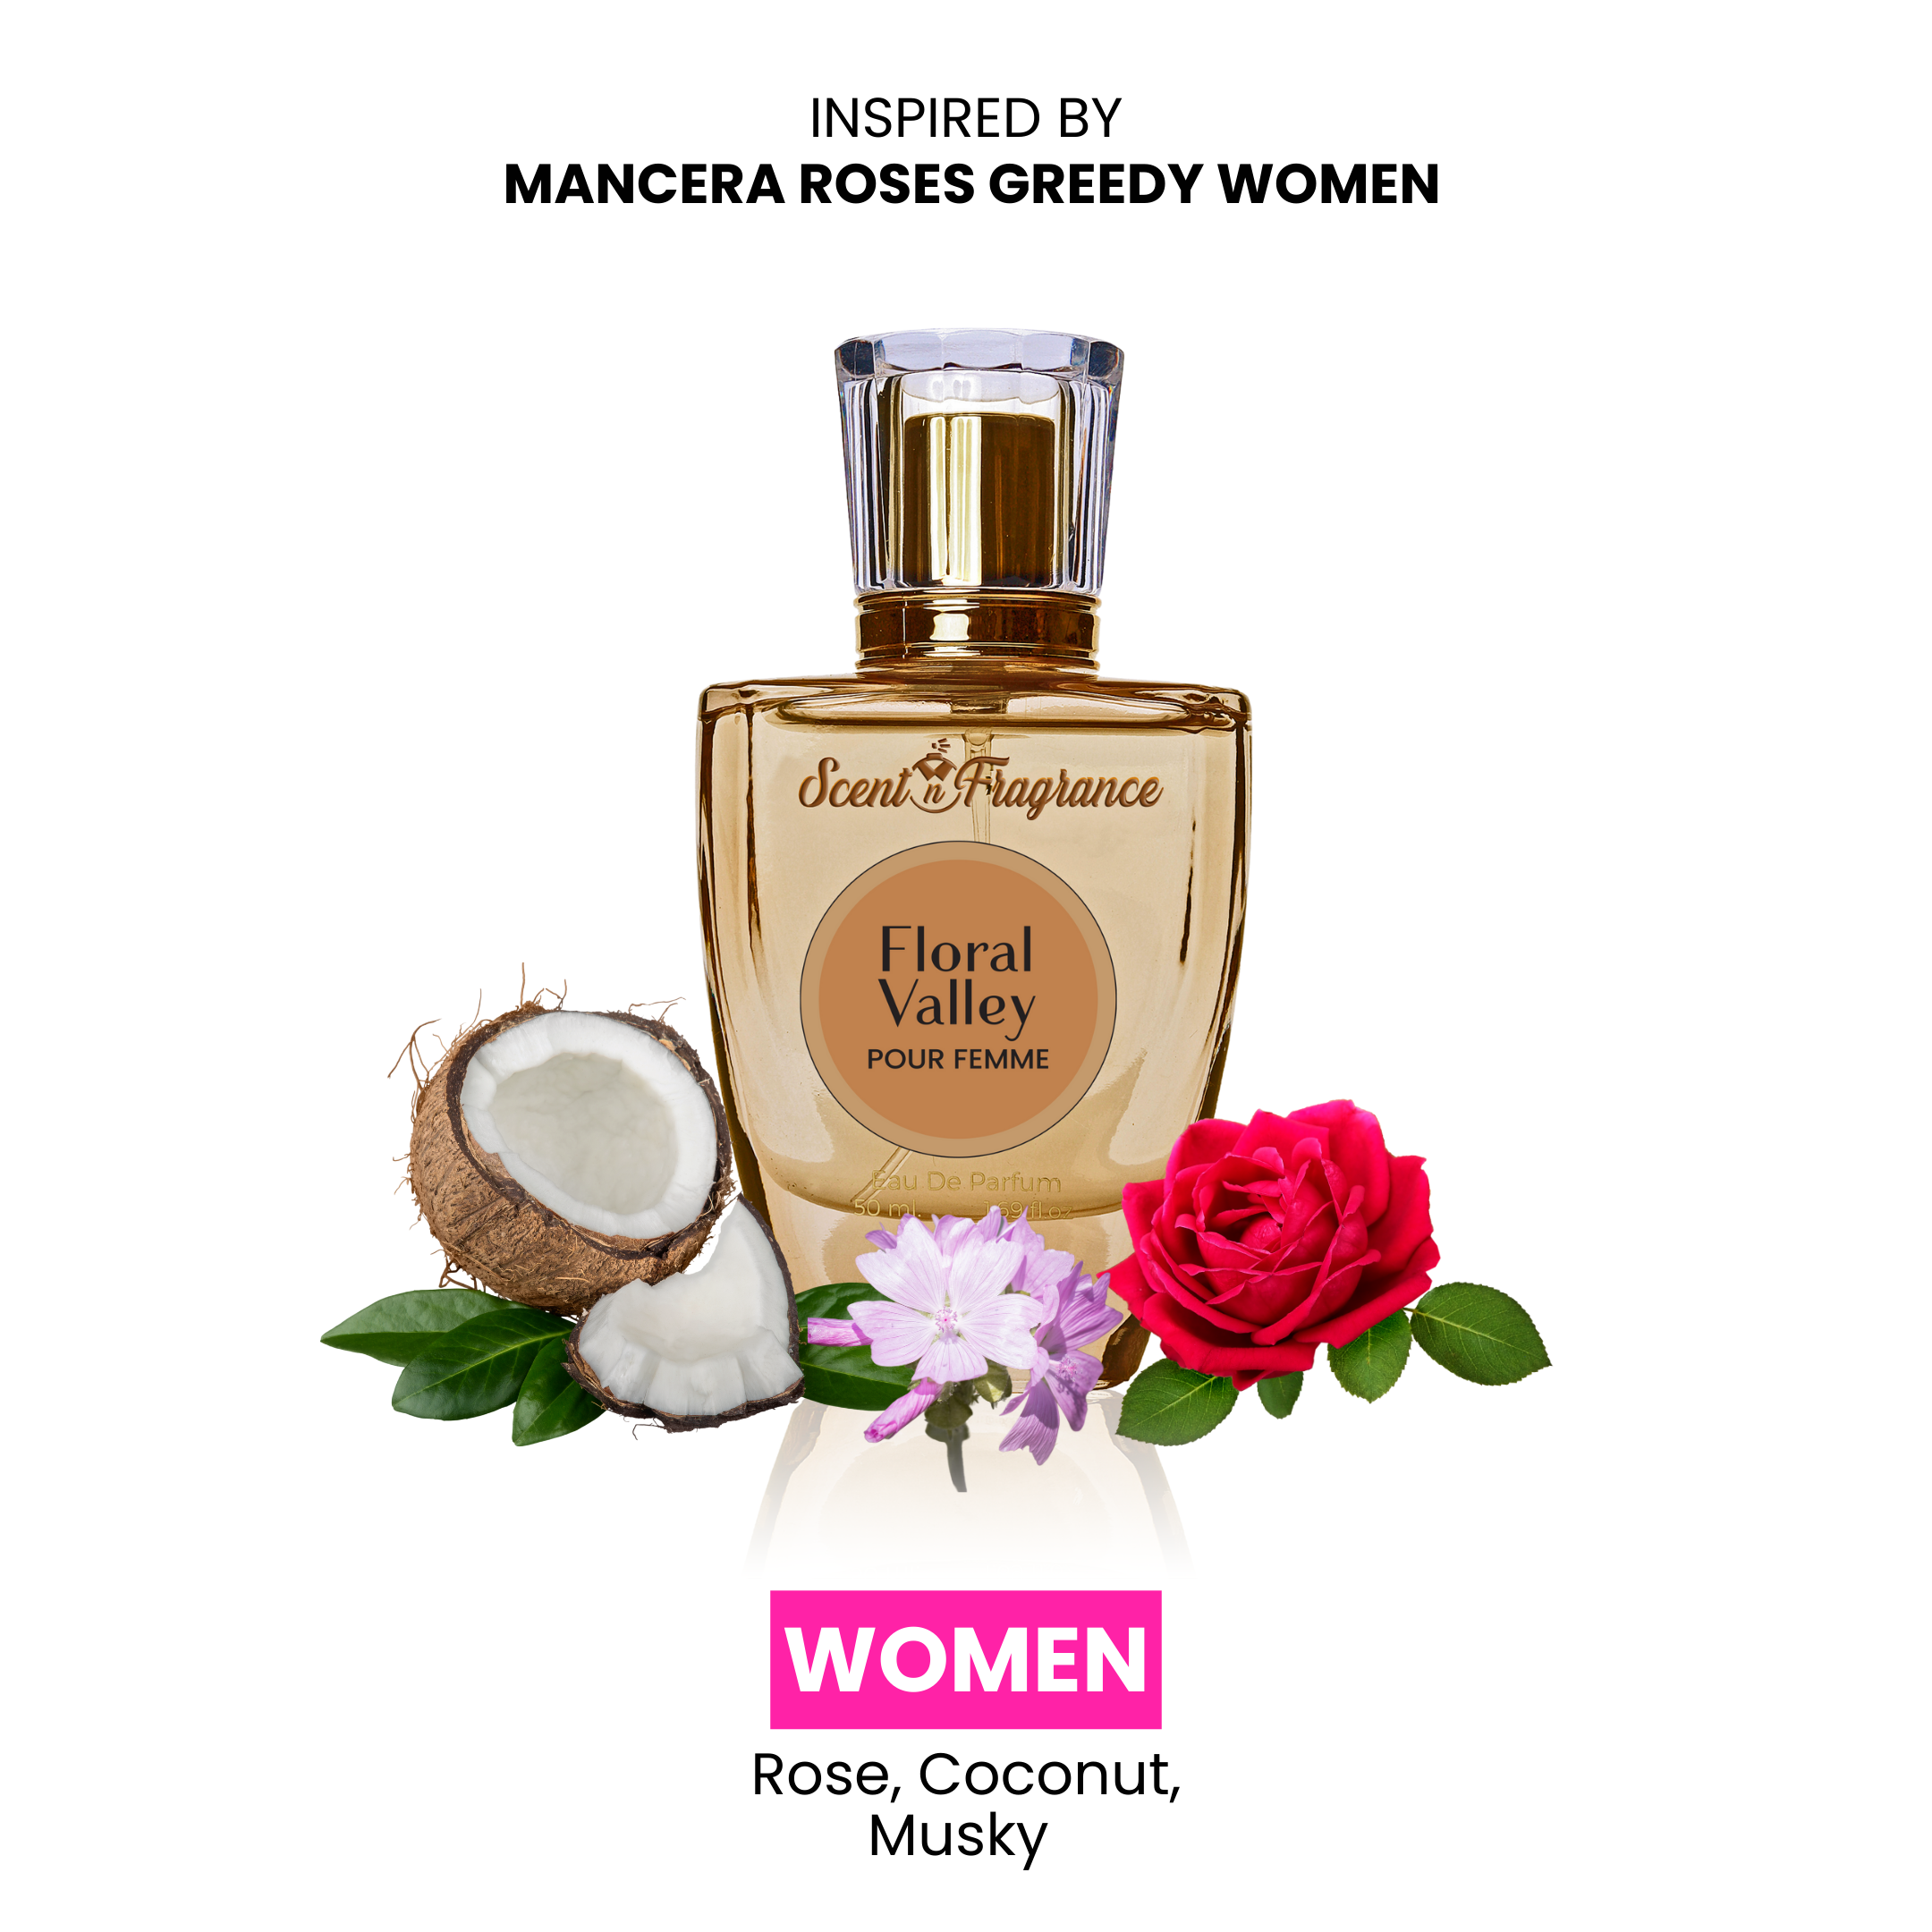 FLORAL VALLEY - INSPIRED BY MANCERA ROSES GREEDY WOMEN by Scent N Fragrance